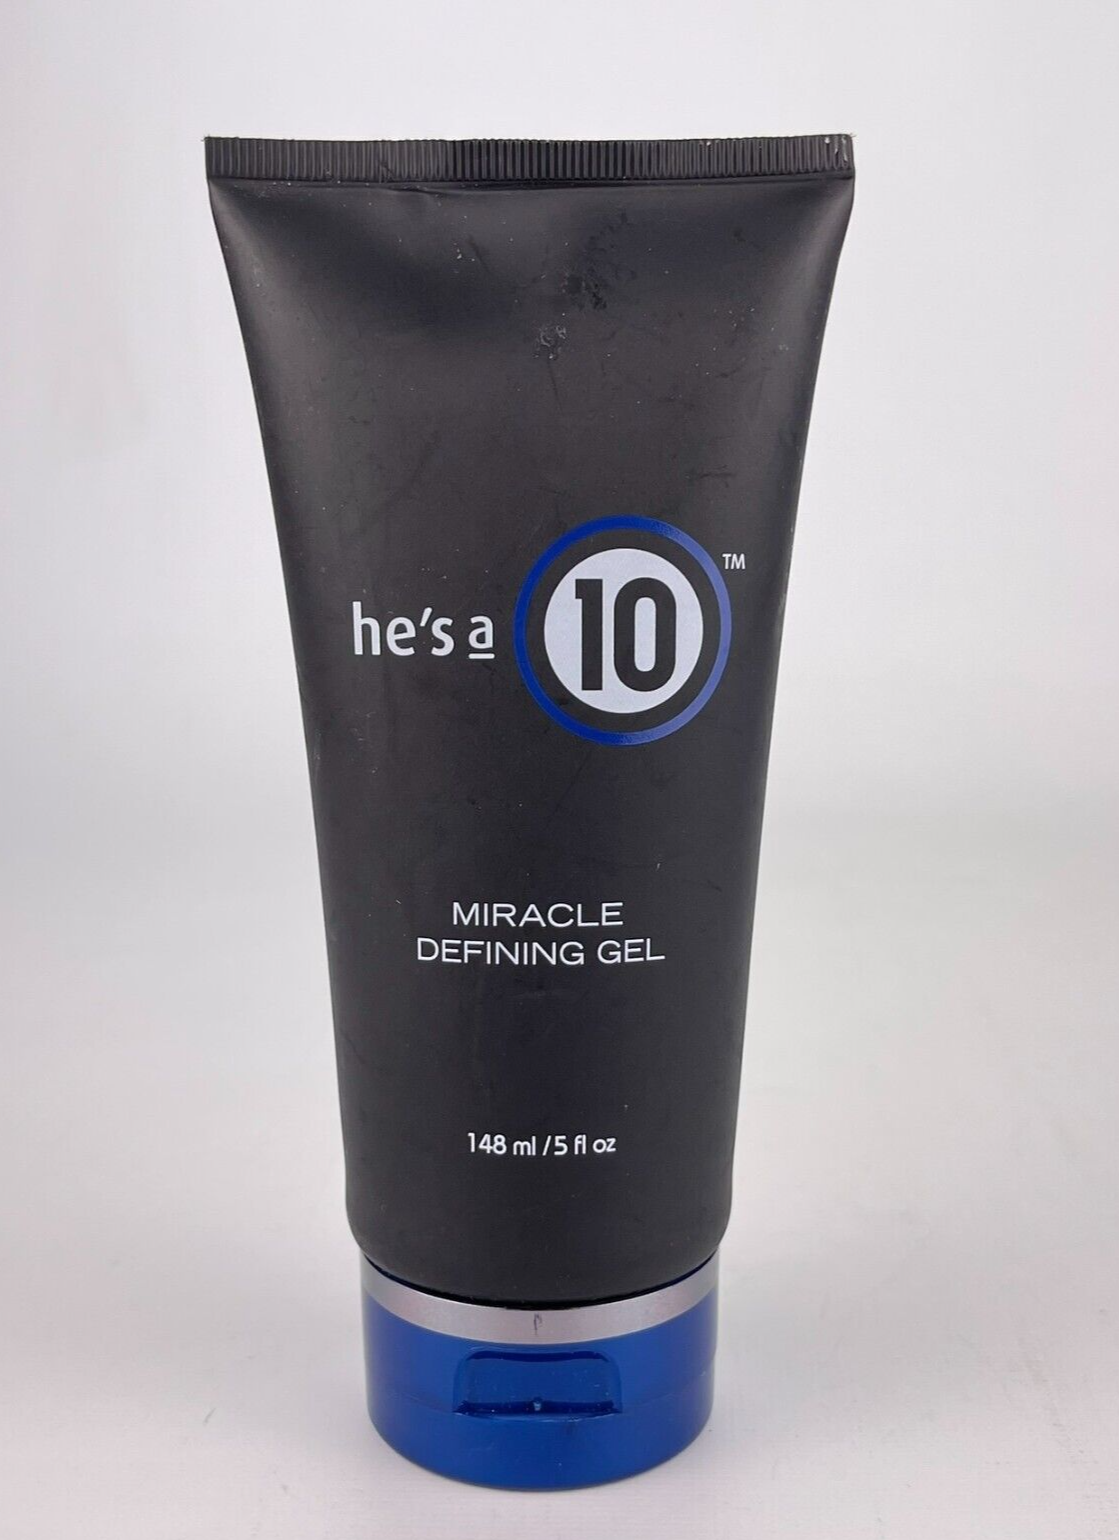 Hes a 10 Miracle Defining Hair Gel 5 Fluid Ounces Its a 10 Men New - $19.30